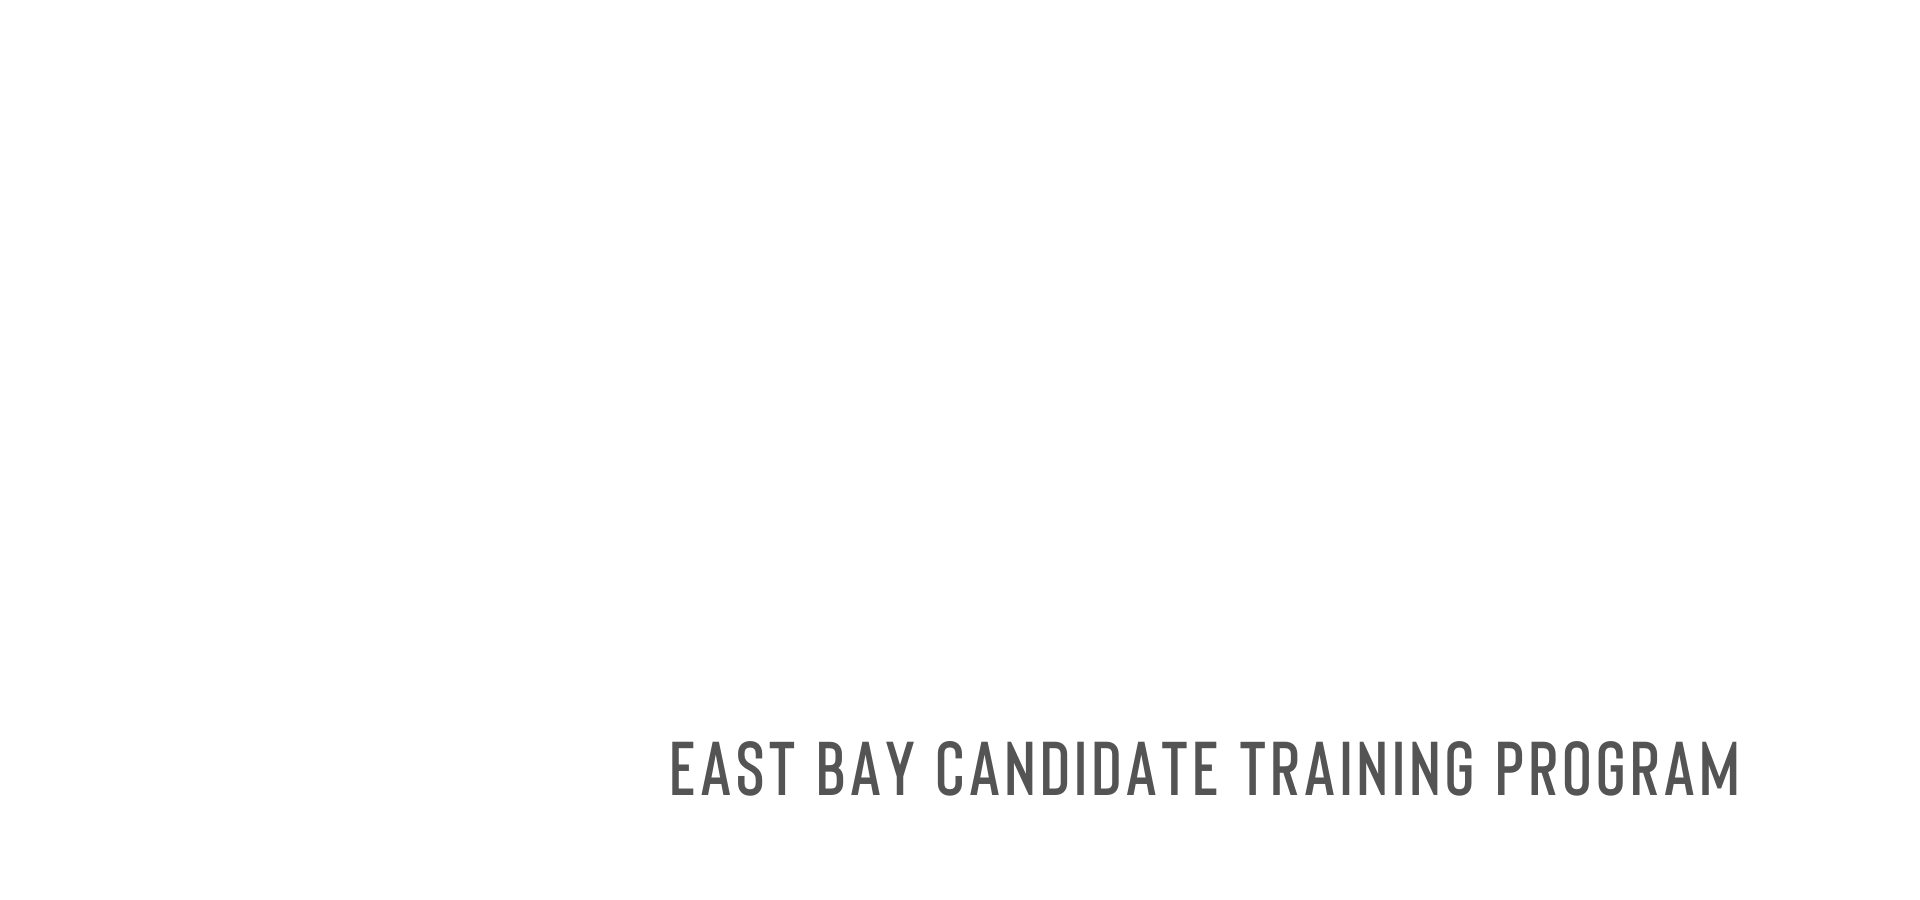 Build the Bench - An East Bay Candidate Training Program